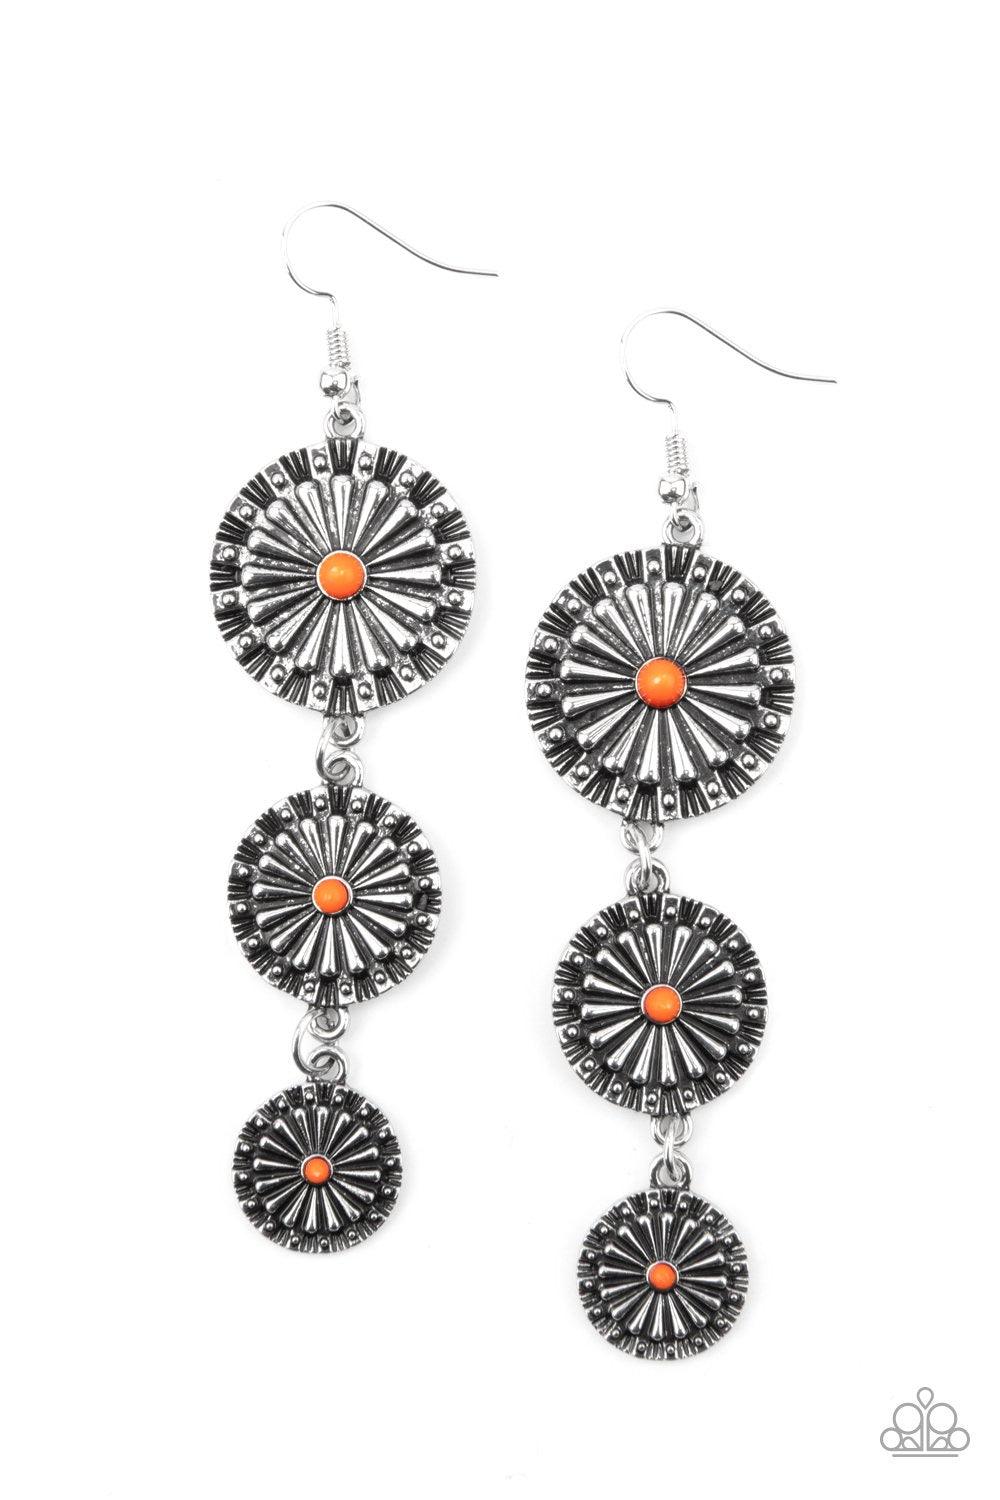 Paparazzi Accessories Festive Floral - Orange Dotted with dainty orange beads, rustic silver floral frames gradually decrease in size as they swing from the ear, creating a colorful lure. Earring attaches to a standard fishhook fitting. Sold as one pair o